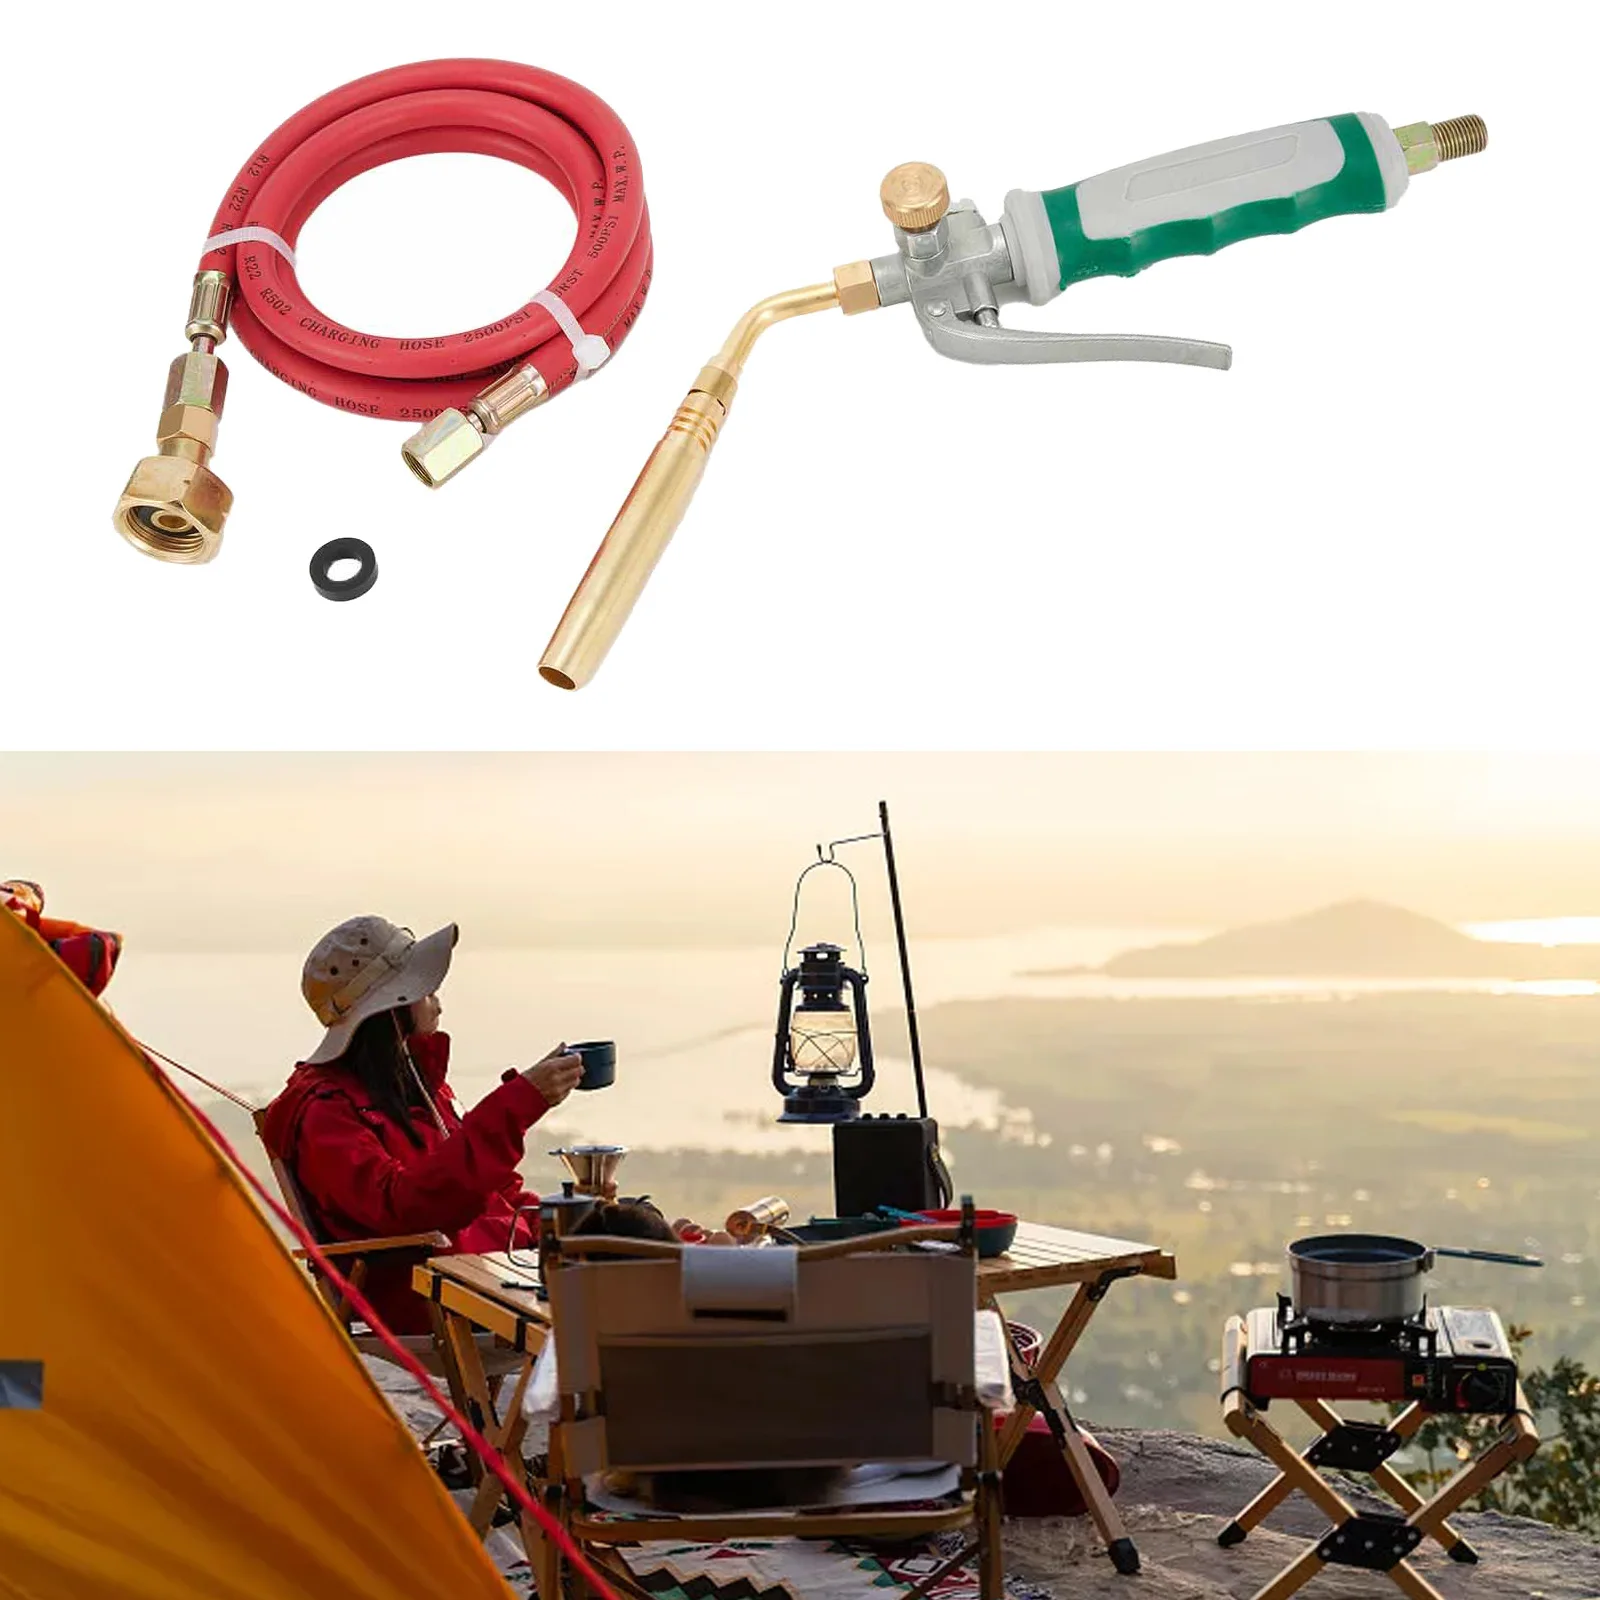 

Durable Outdoor Welding Torch Tool Flamethrower For Soldering Liquefied Gas Stable With 63inch Hose Zinc Alloy